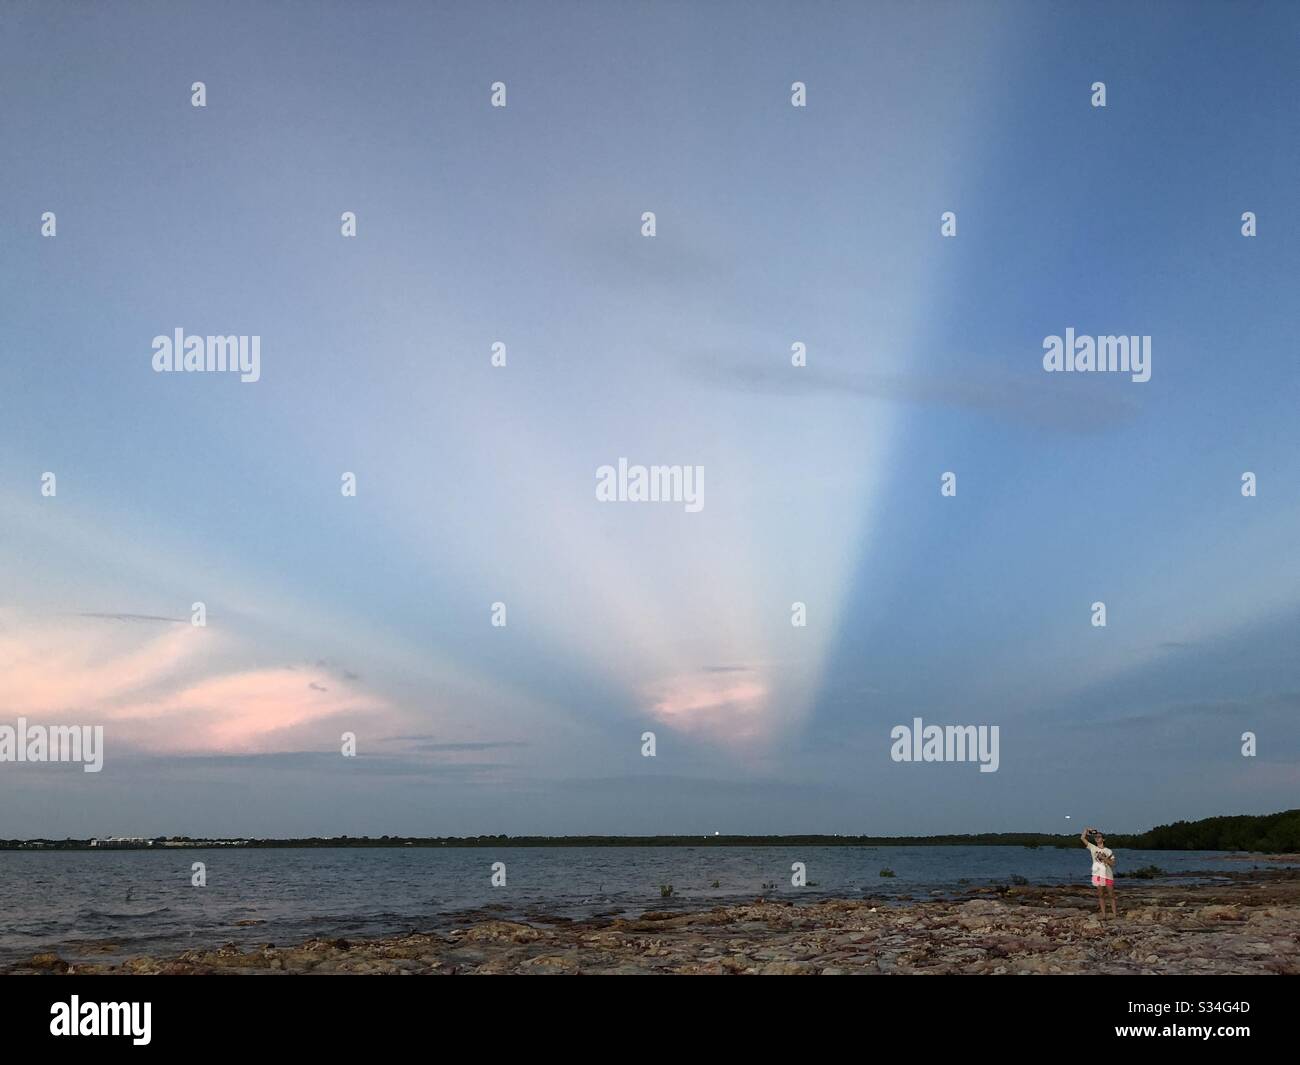 Lonely teenager alone on a beach at sunset. In Darwin, Northern Territory, Australia. Stock Photo